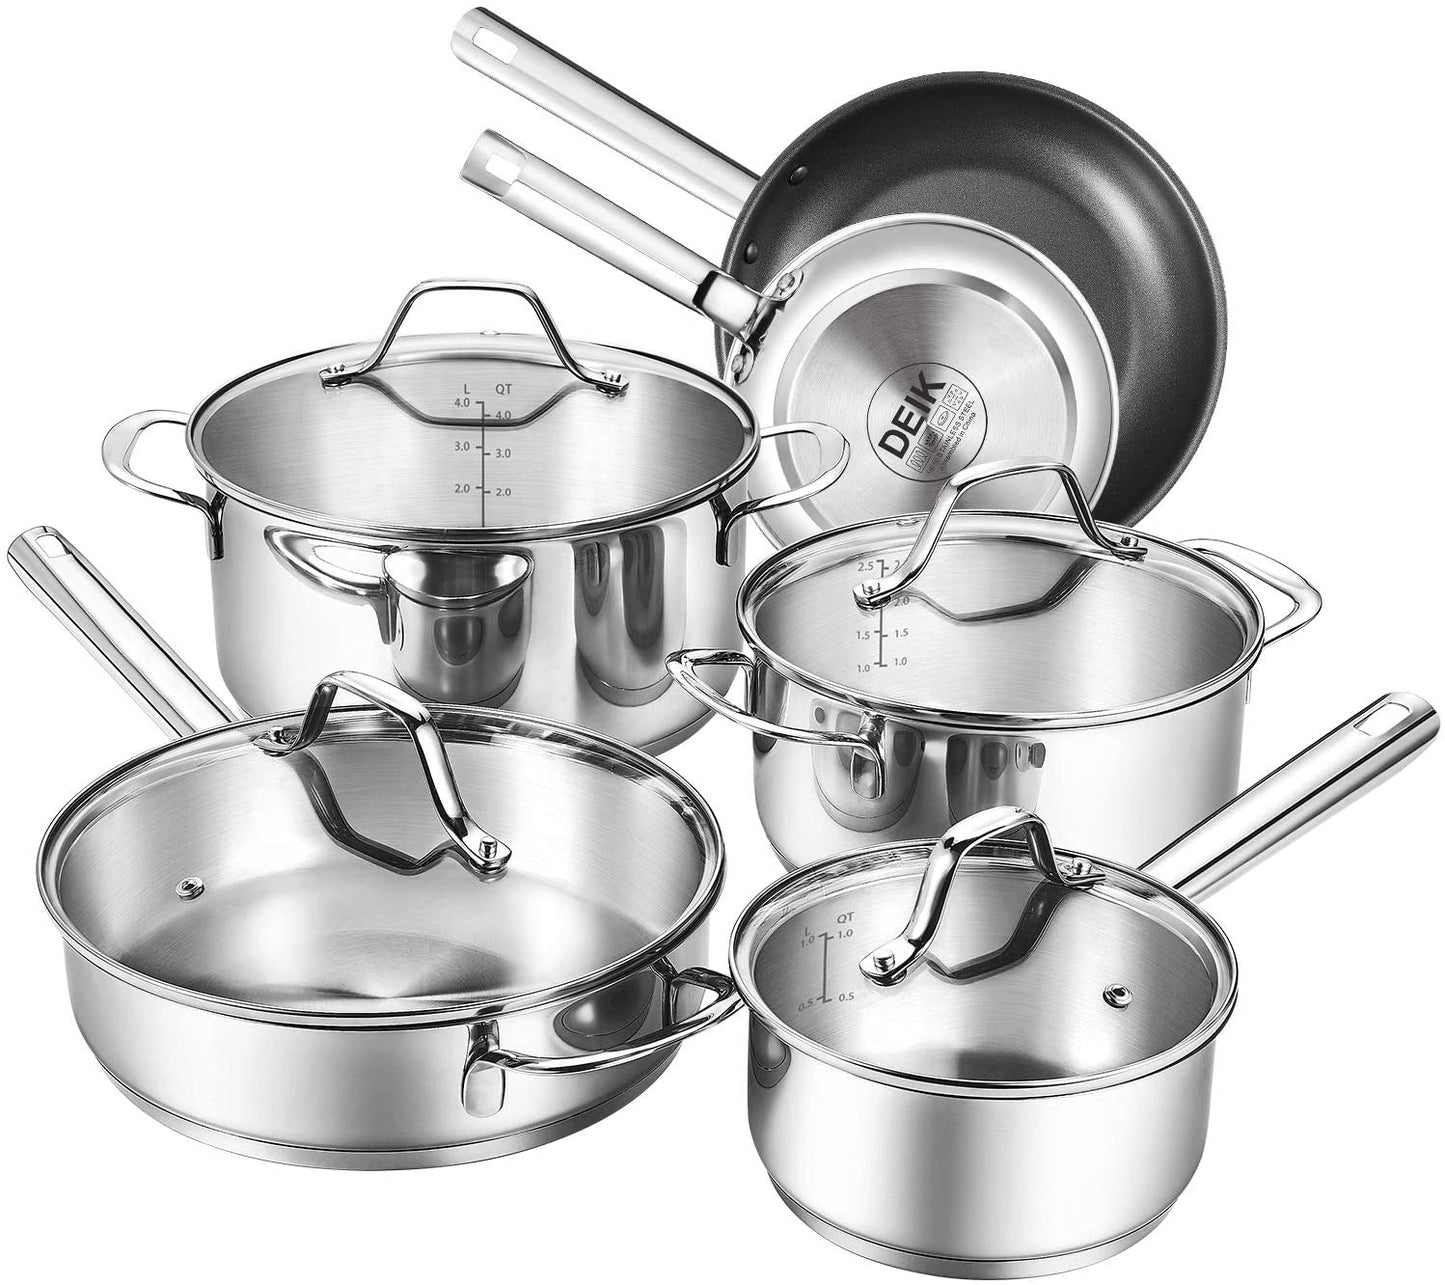 DEIK 10-piece stainless steel cookware set, suitable for induction cookers, with lids, stainless steel cookware, pot sets